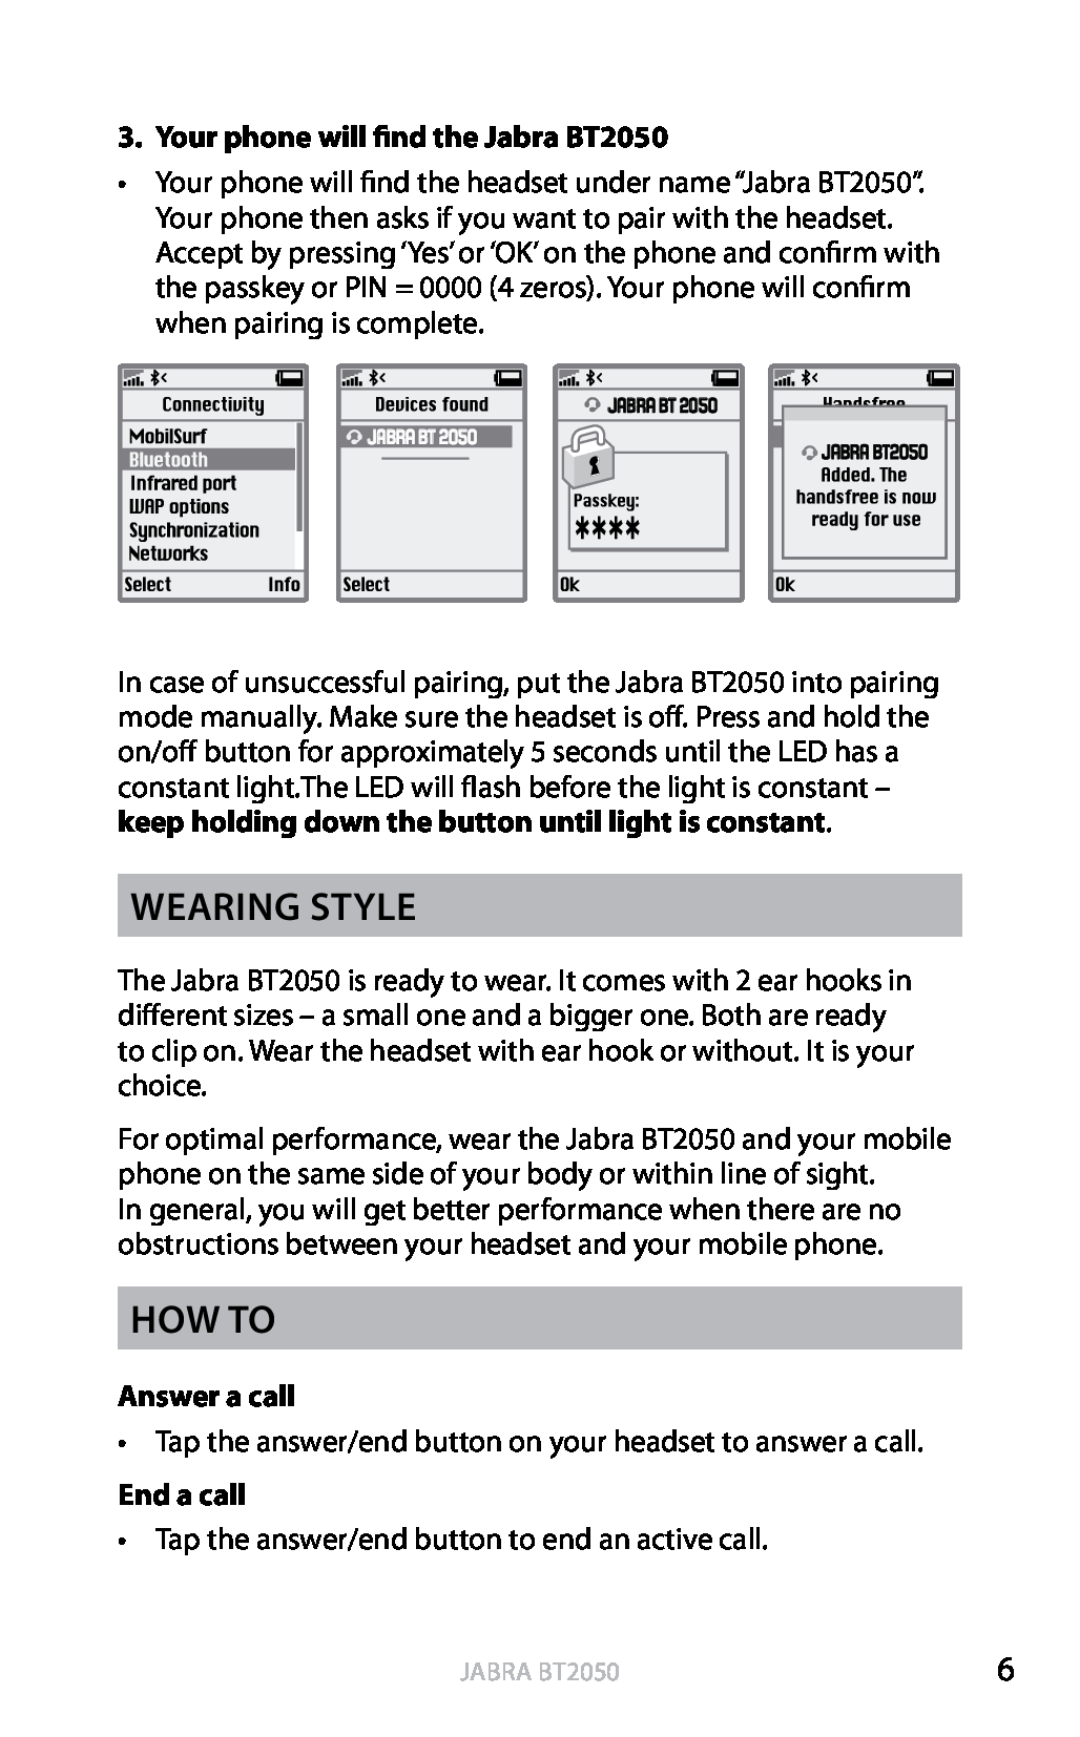 Jabra user manual Wearing style, How to, Your phone will find the Jabra BT2050, Answer a call, End a call, english 